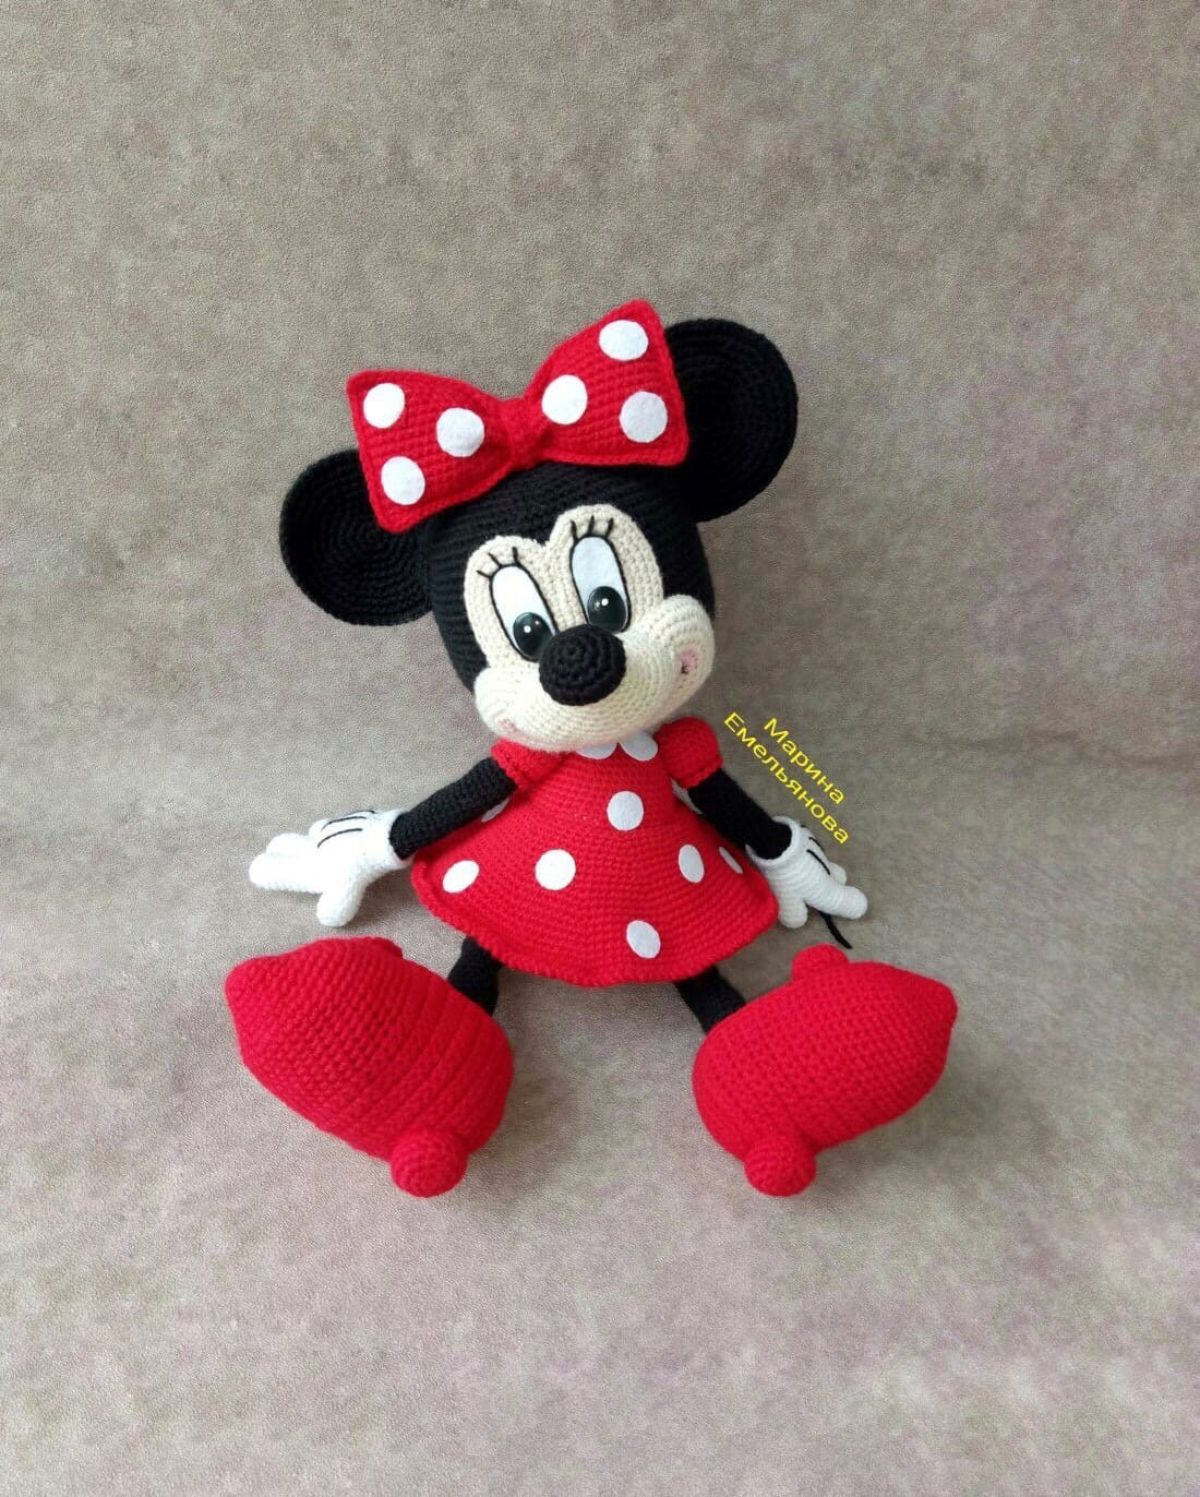 Small crochet Minnie Mouse toy with a red and white spotty dress, matching bow, and oversized red shoes.